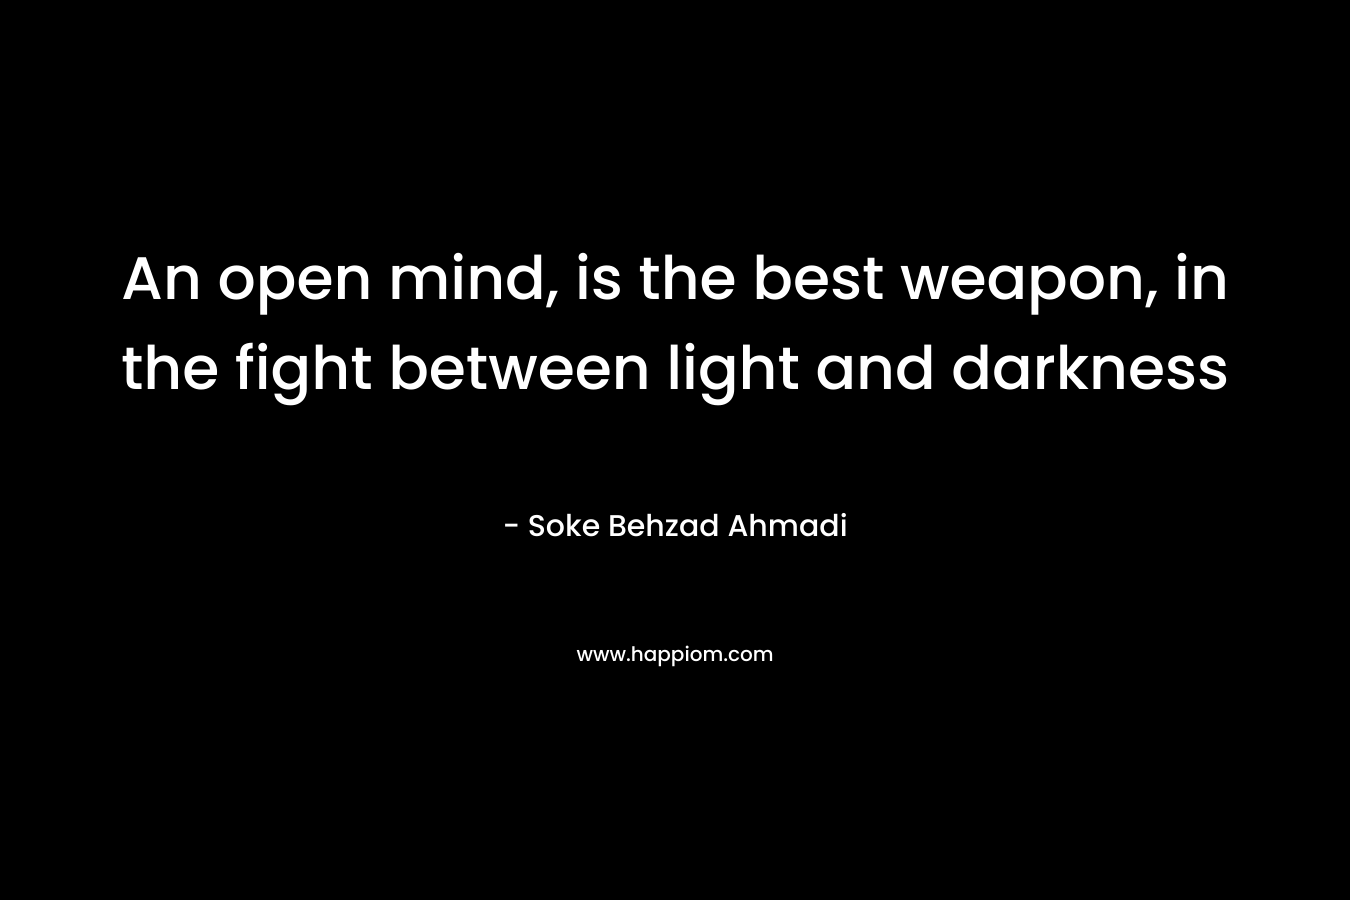 An open mind, is the best weapon, in the fight between light and darkness